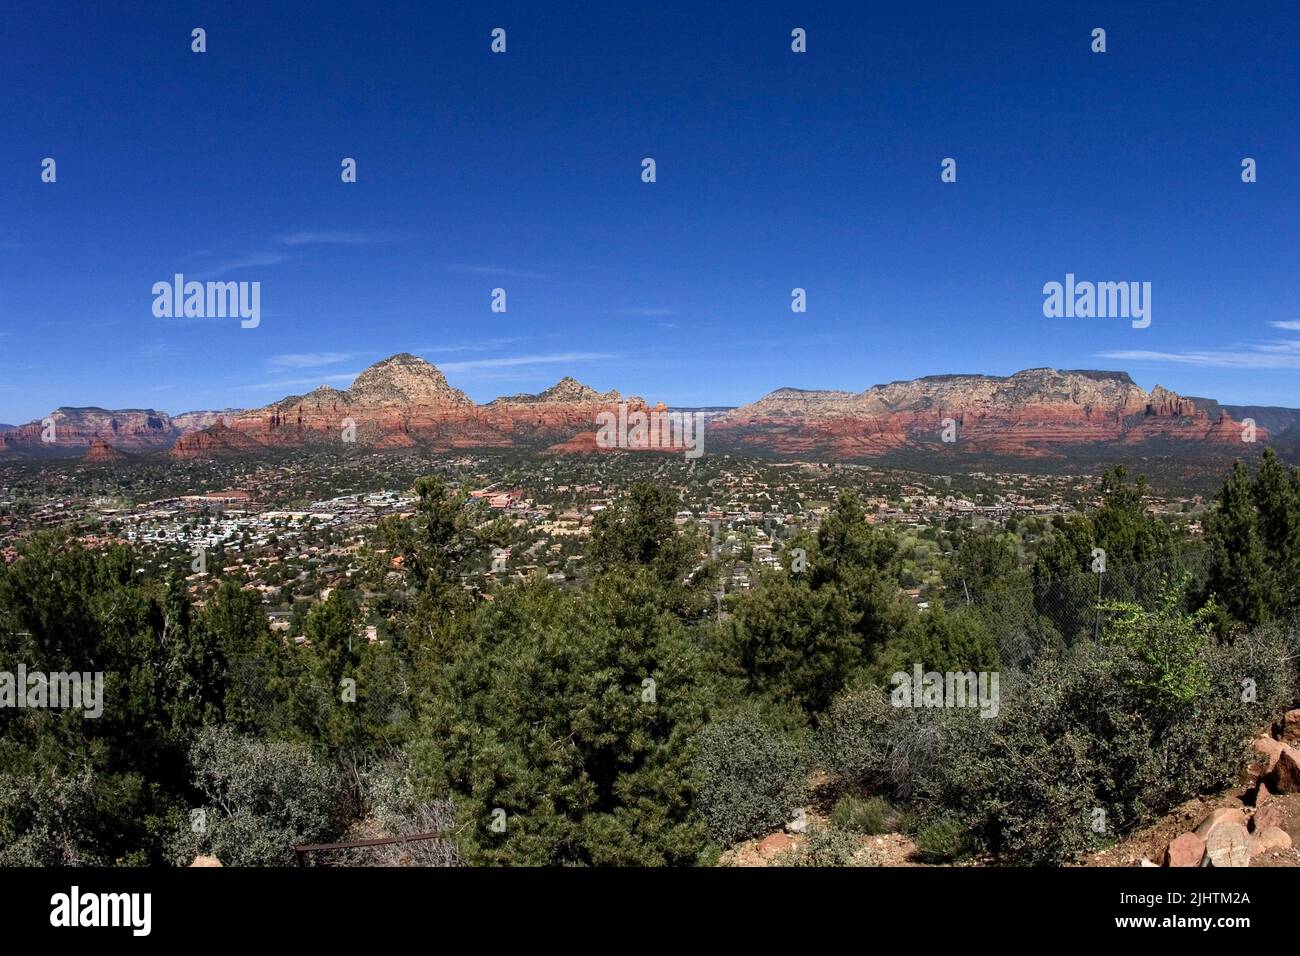 A view from a distance of Sedona, Arizona. Stock Photo